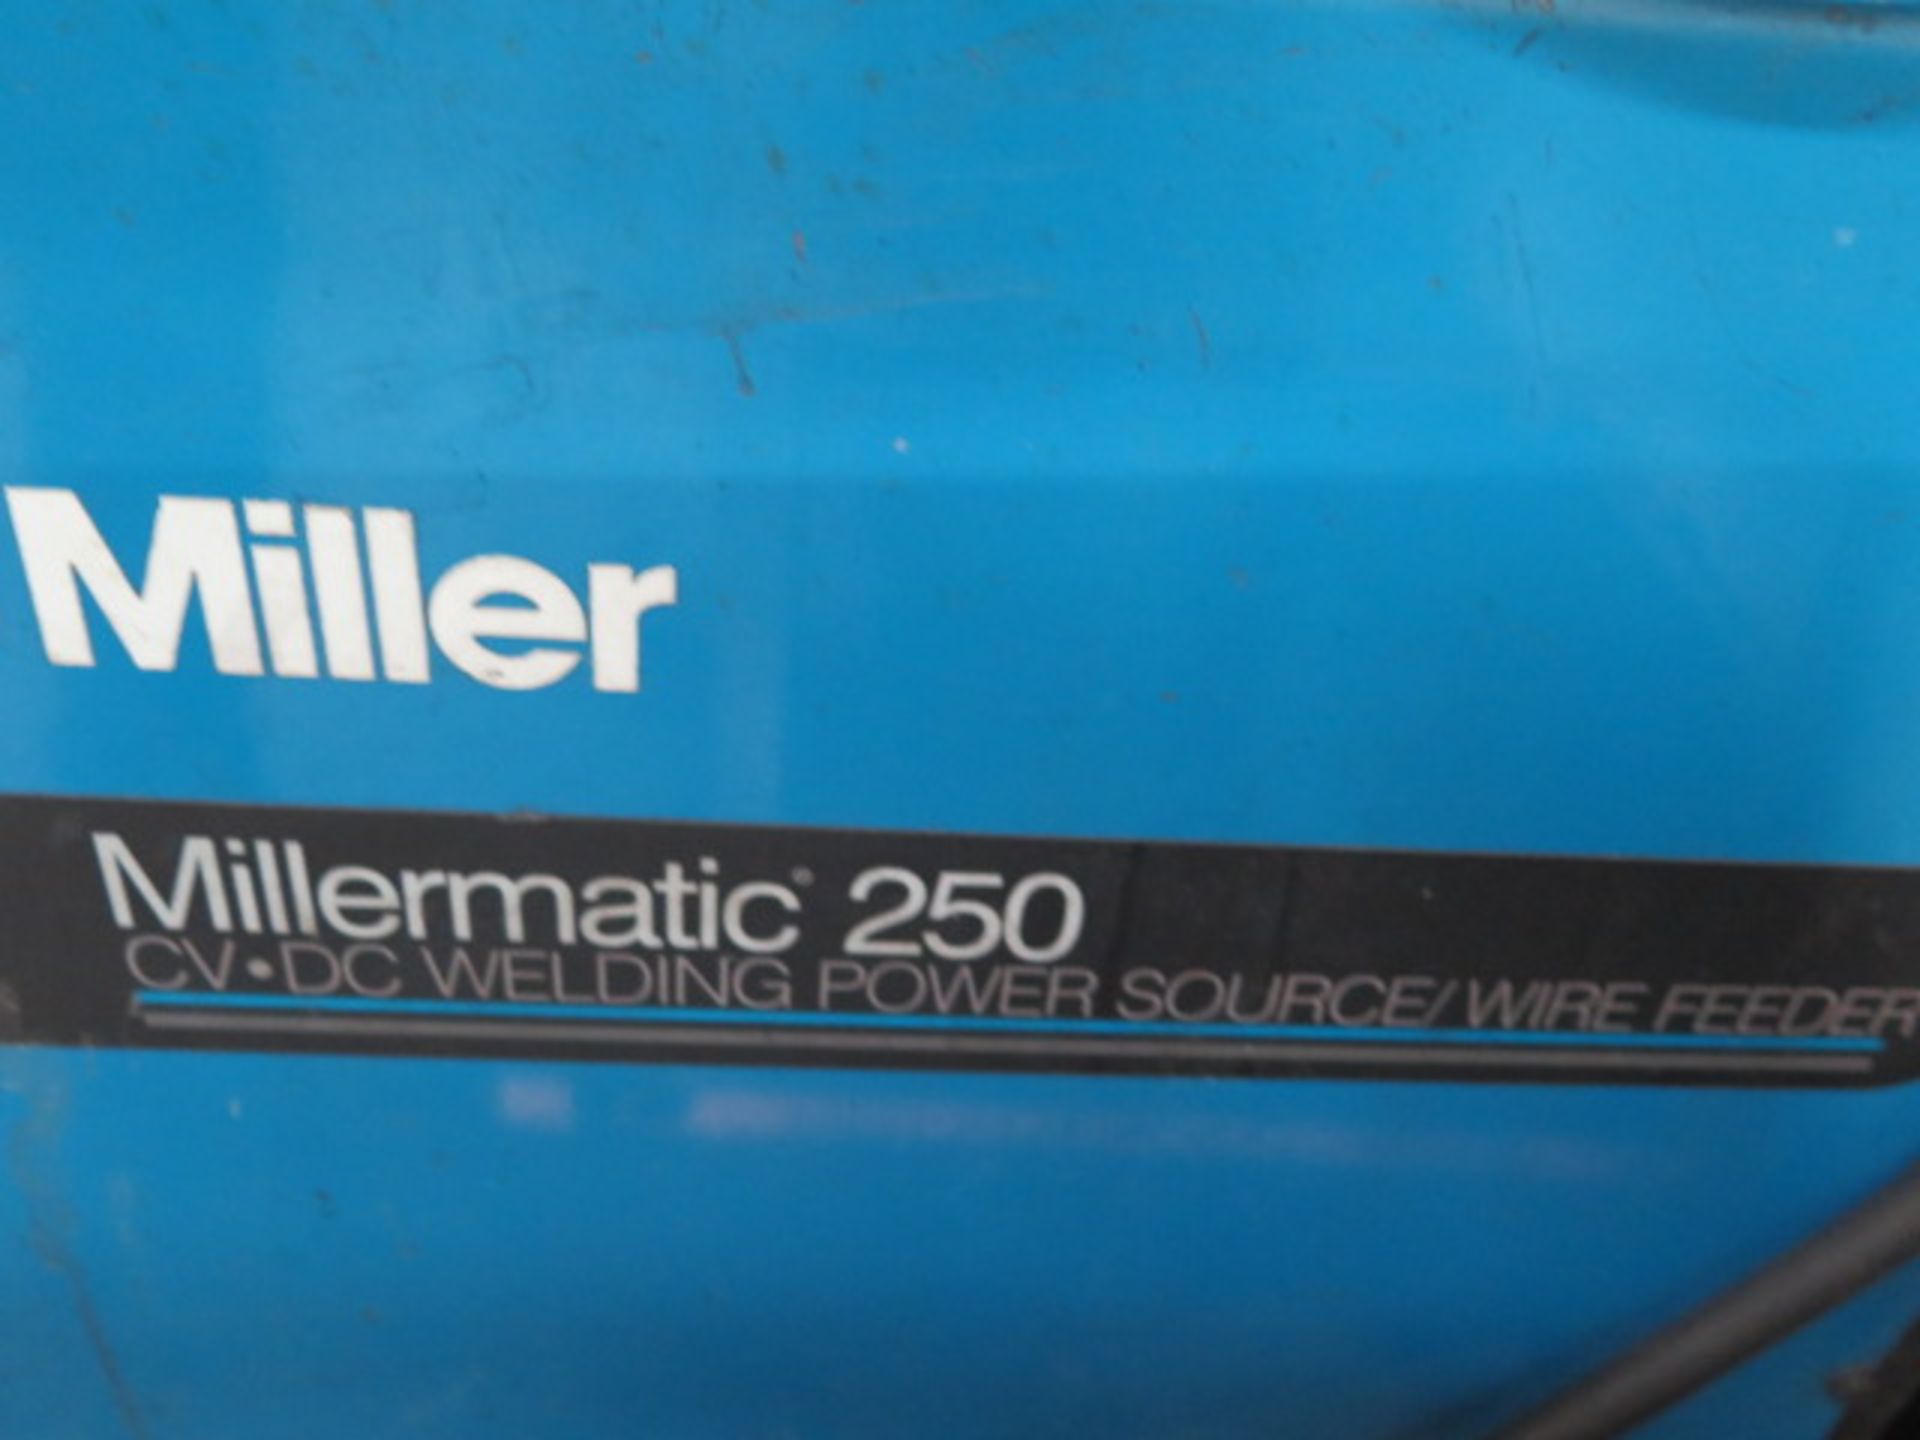 Miler Millermatic 250 CV-DC Arc Welding Power Source and Wire Feeder (SOLD AS-IS - NO WARRANTY) - Image 4 of 10